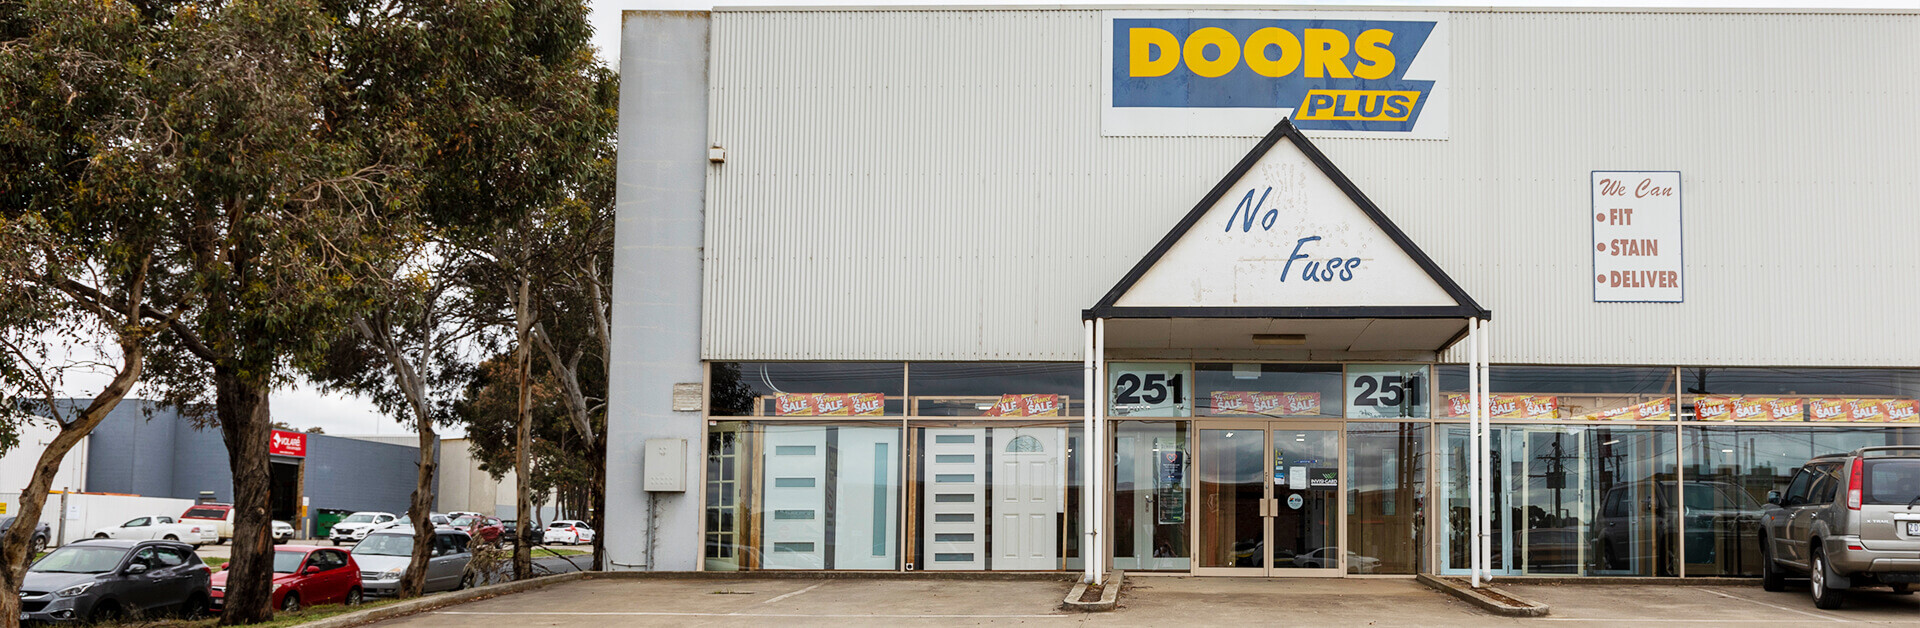 Doors Plus Geelong Store in Victoria, Melbourne with Entrance view